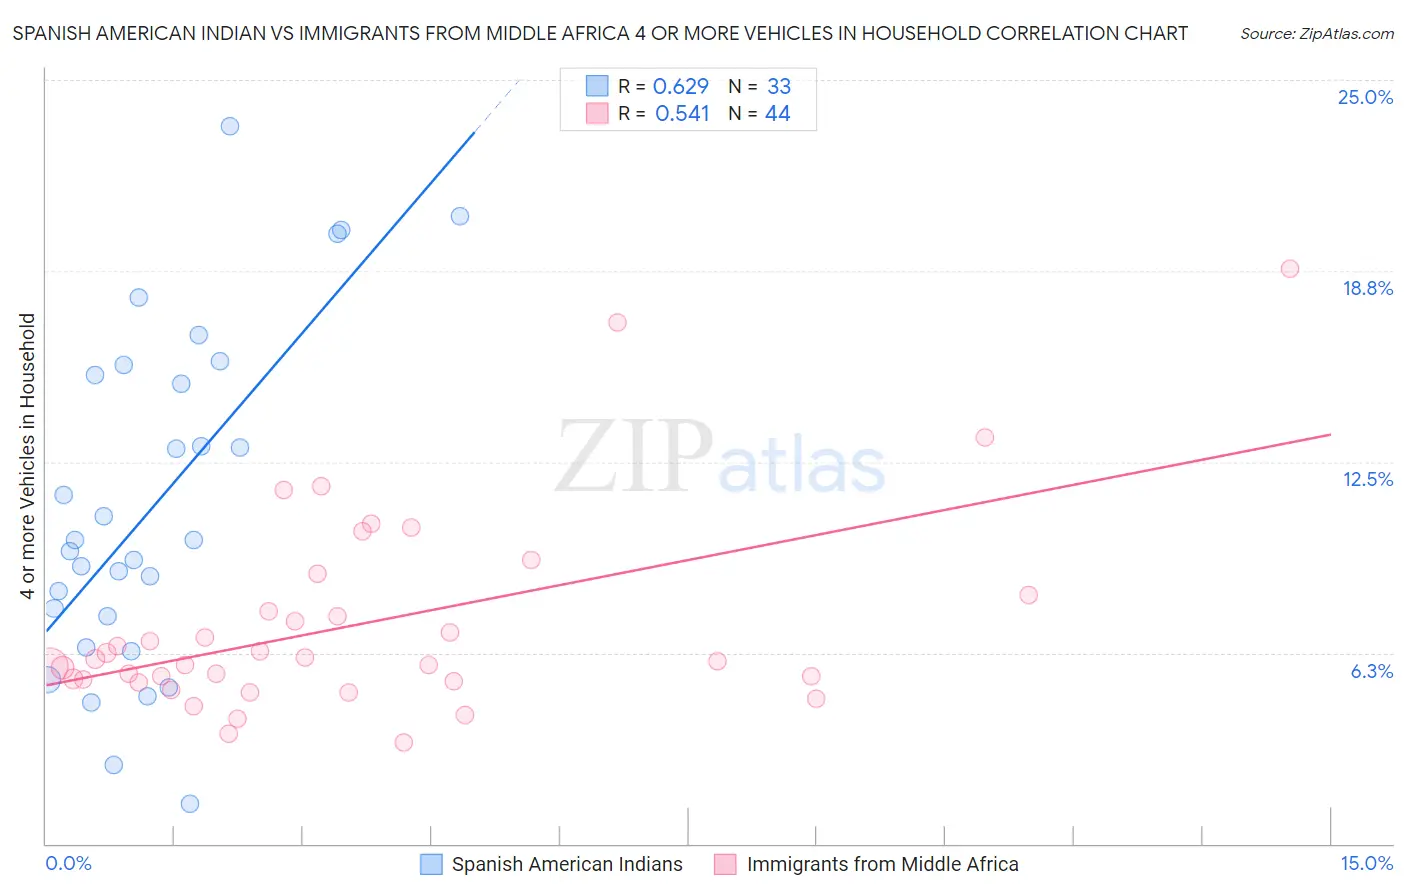 Spanish American Indian vs Immigrants from Middle Africa 4 or more Vehicles in Household